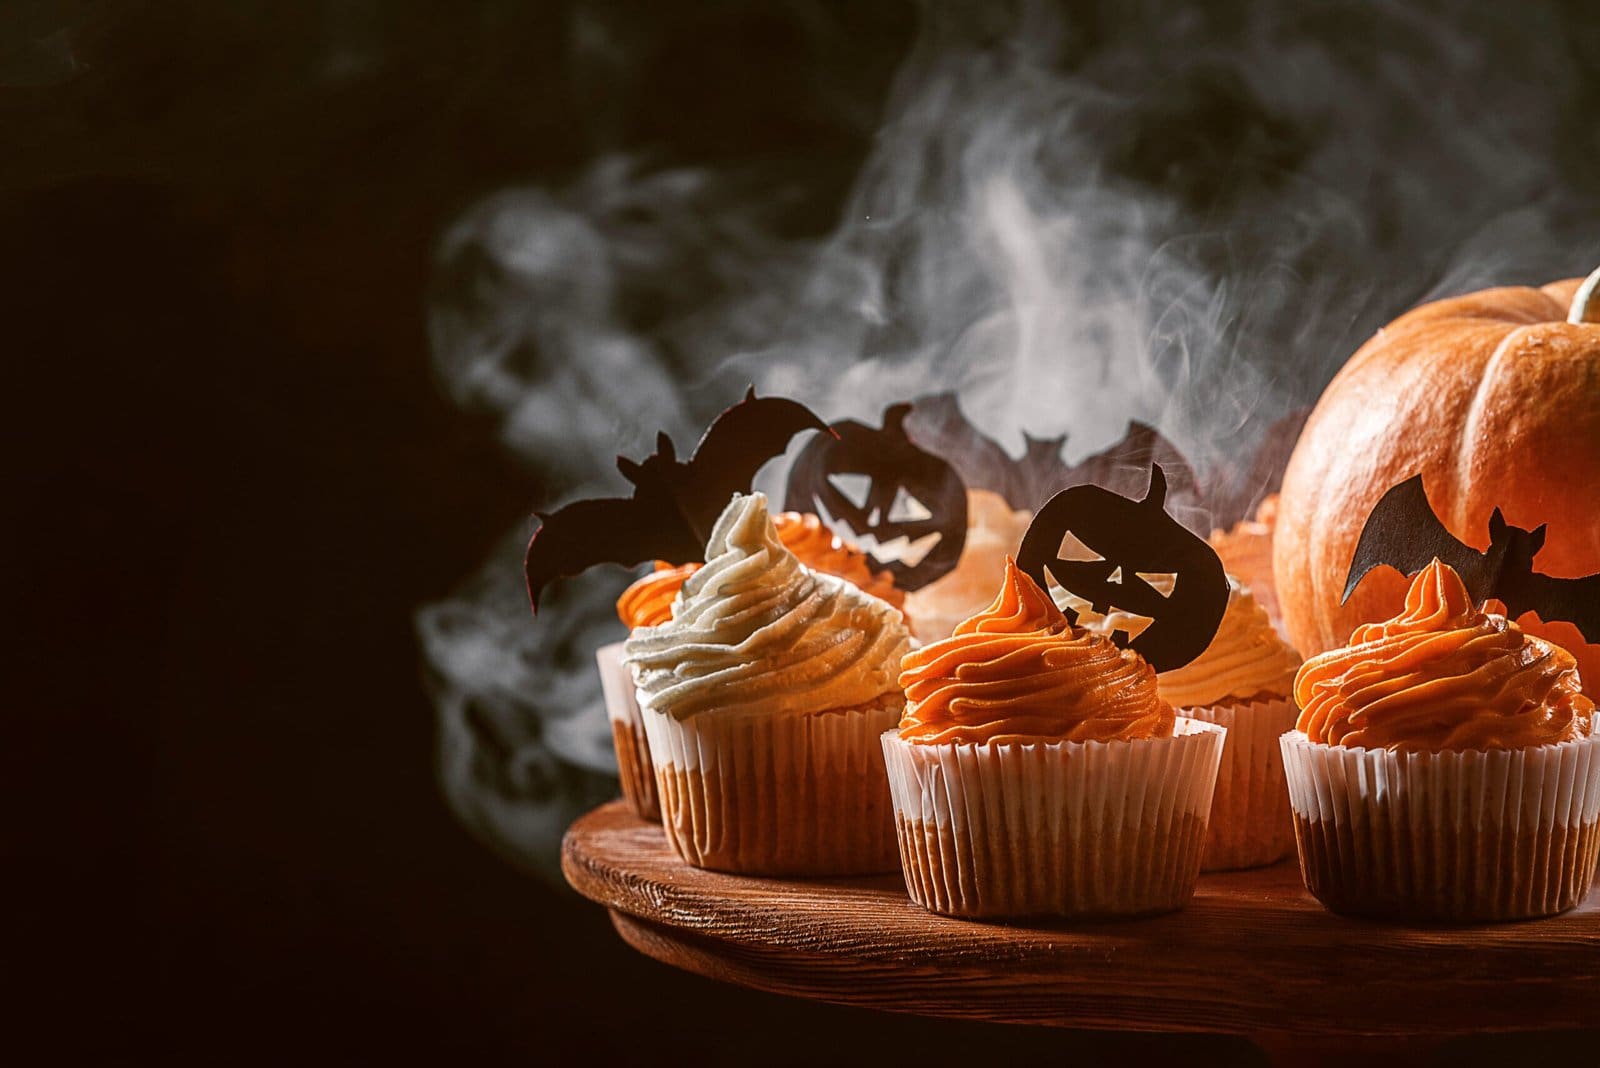 A SCRUMOTIOUS SPOOKY BRUNCH IS BEING OFFERED AT THE NOVOTEL HYDERADAD AIRPORT.